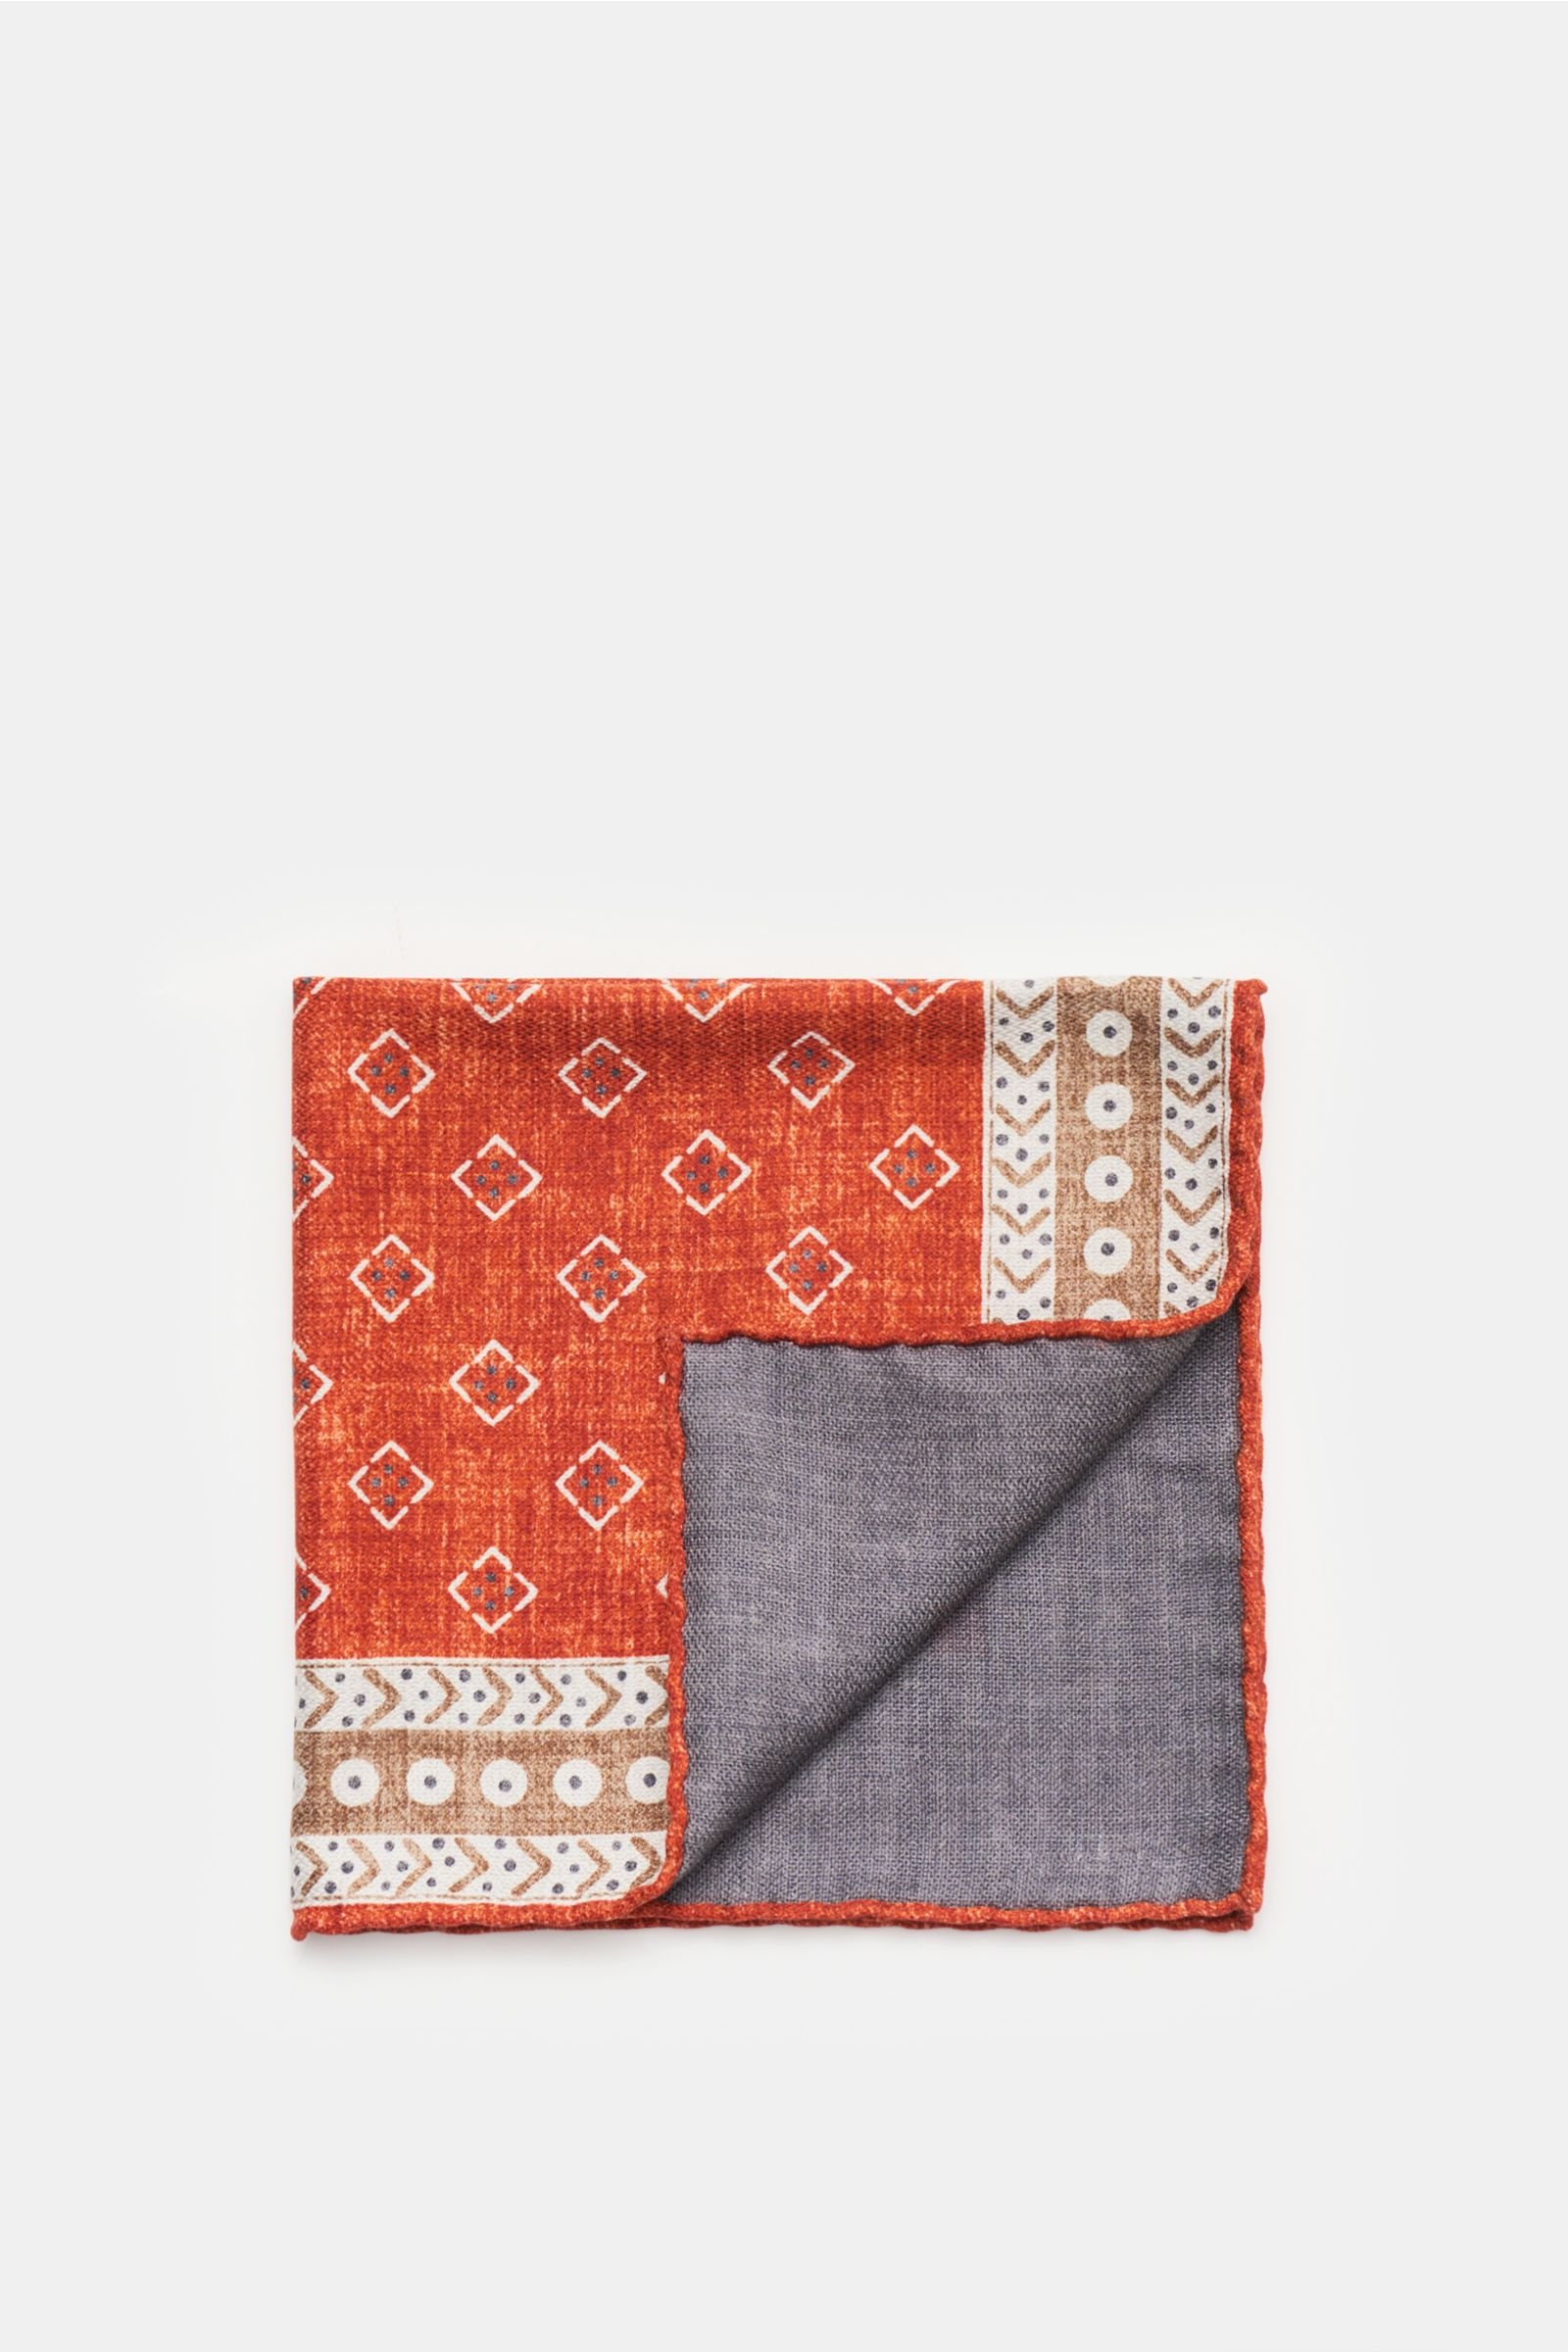 Pocket square rust red/grey-brown patterned